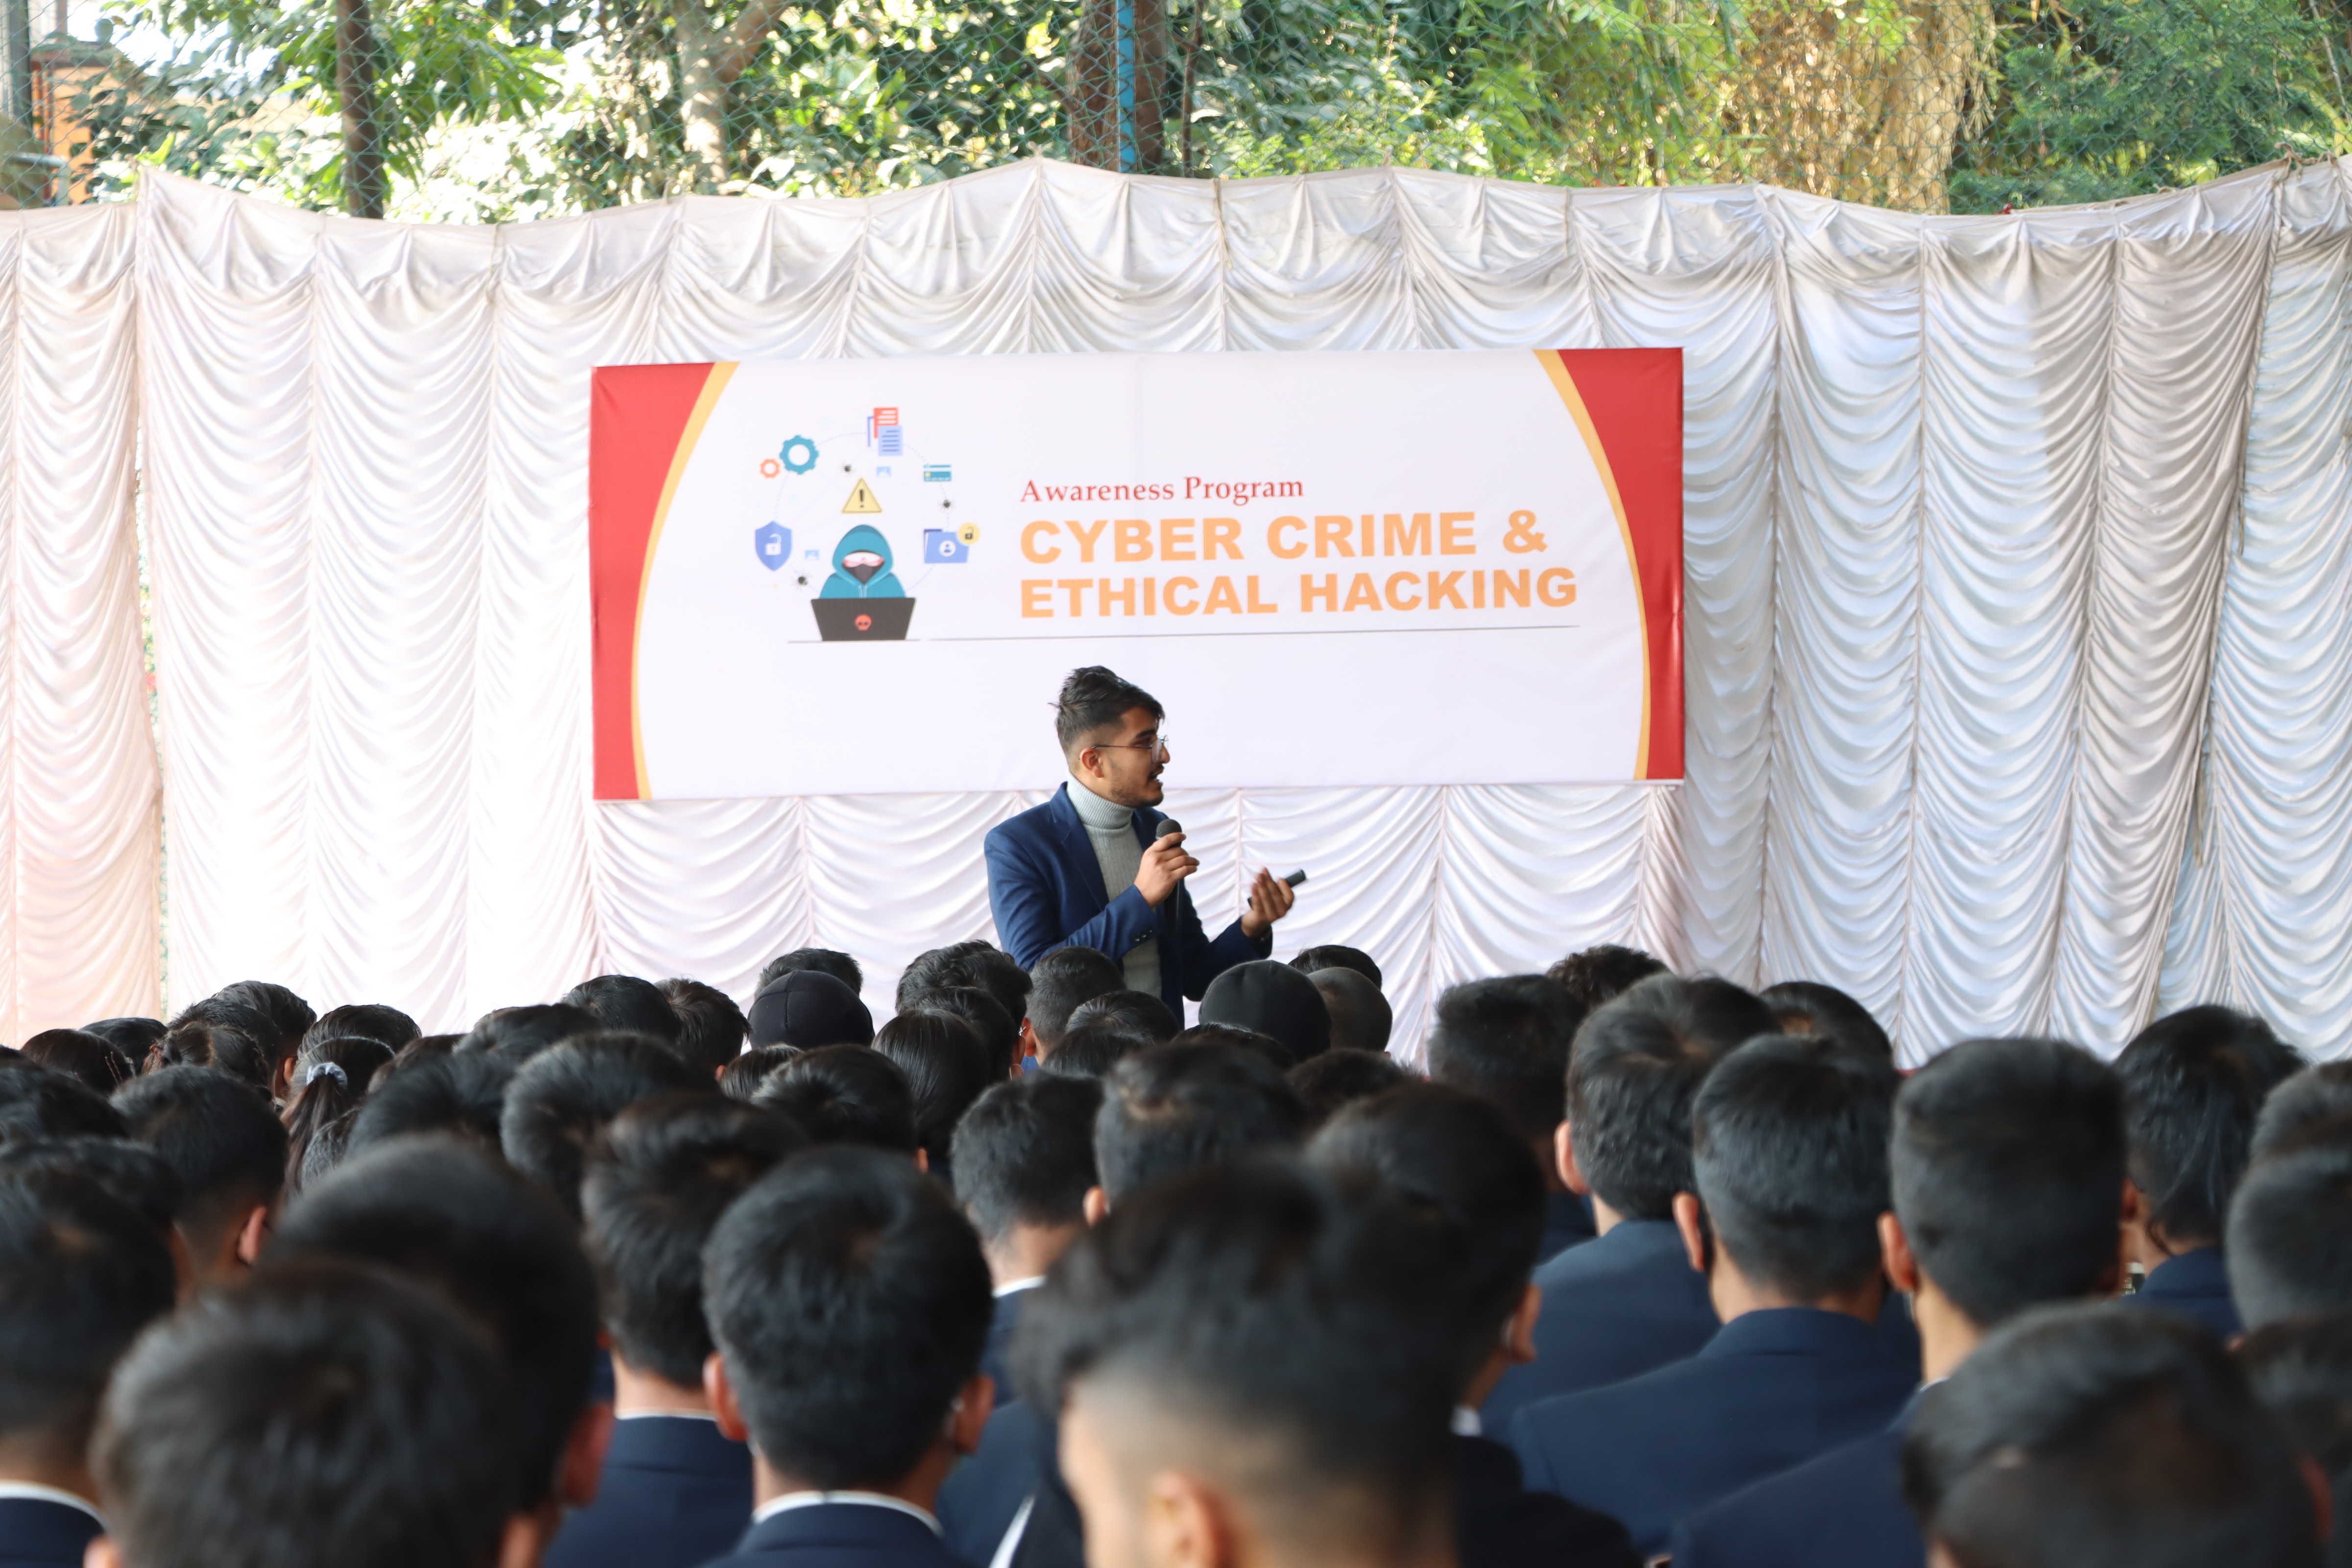 Awareness Program-Cyber Crime and Ethical Hacking 2022